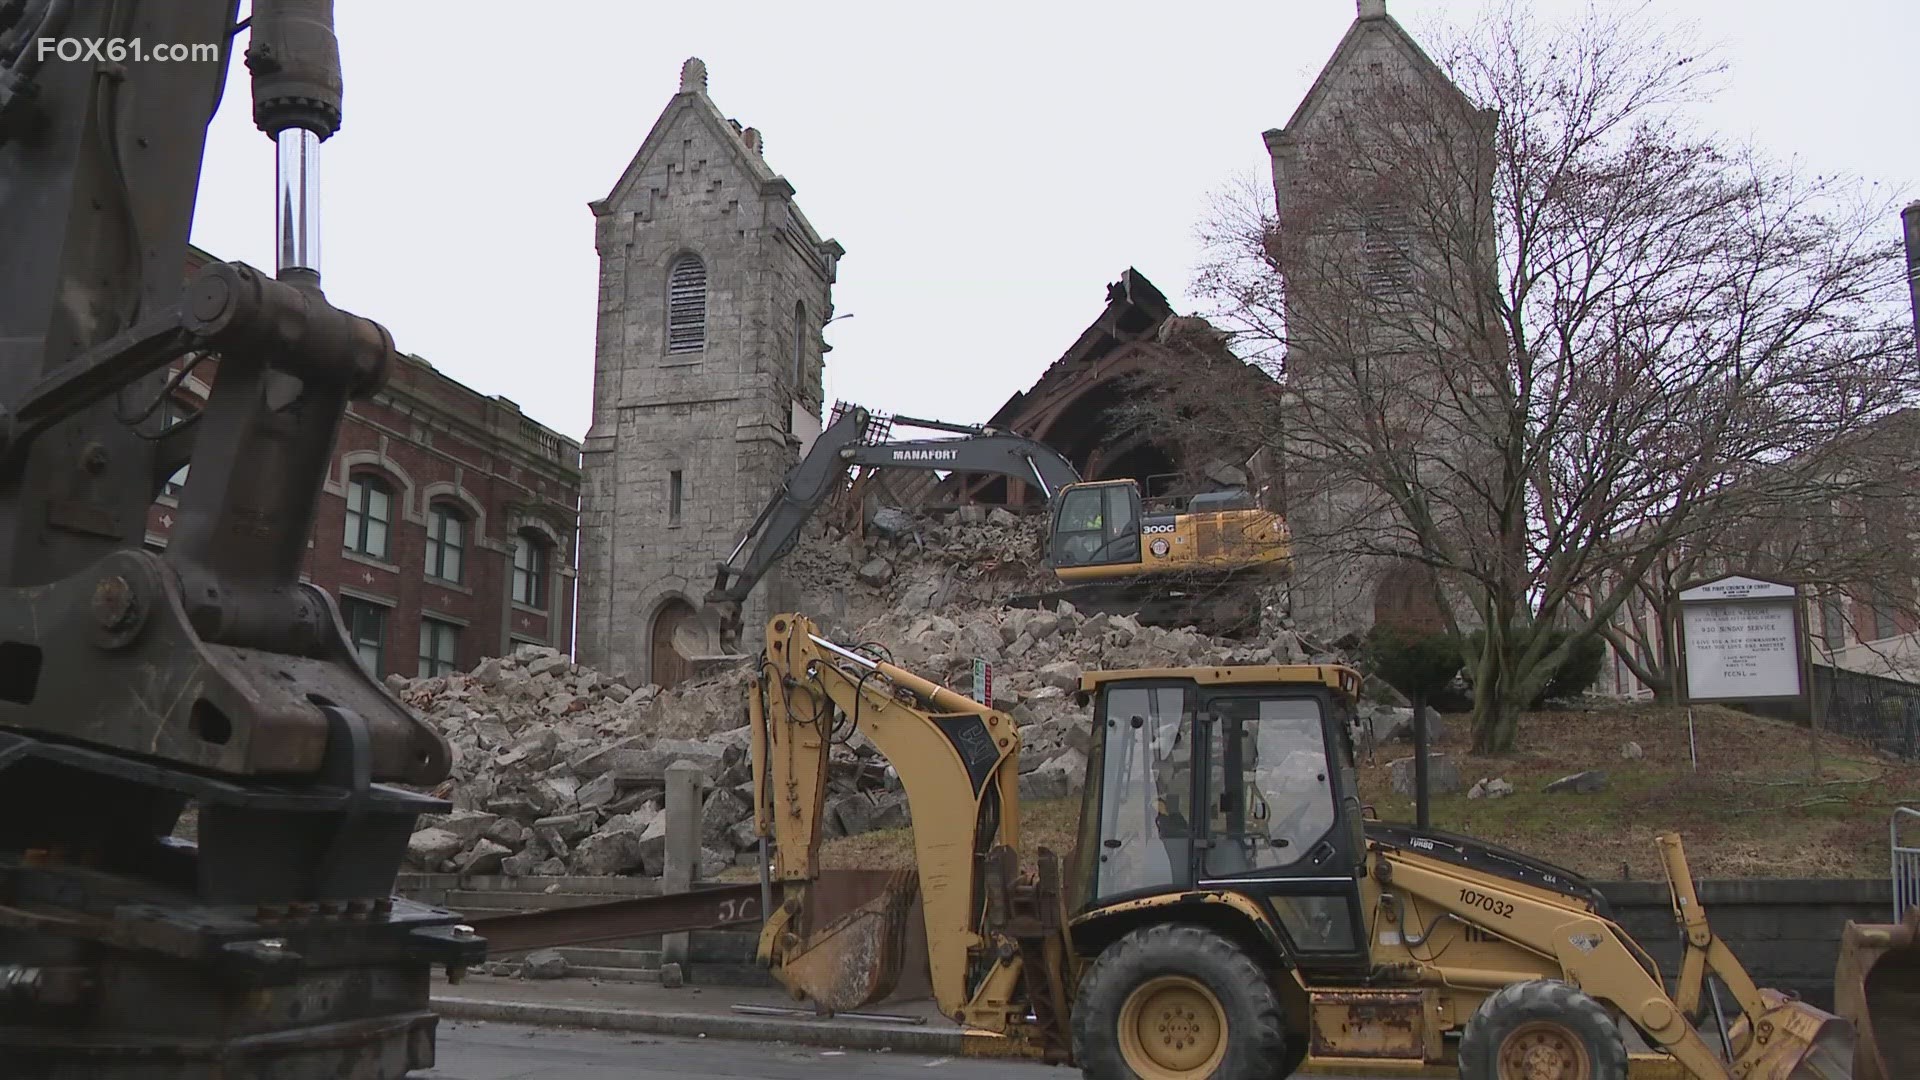 Clean-up continues at a historic church in New London that saw its steeple and roof collapse Thursday as officials said it was a total loss.